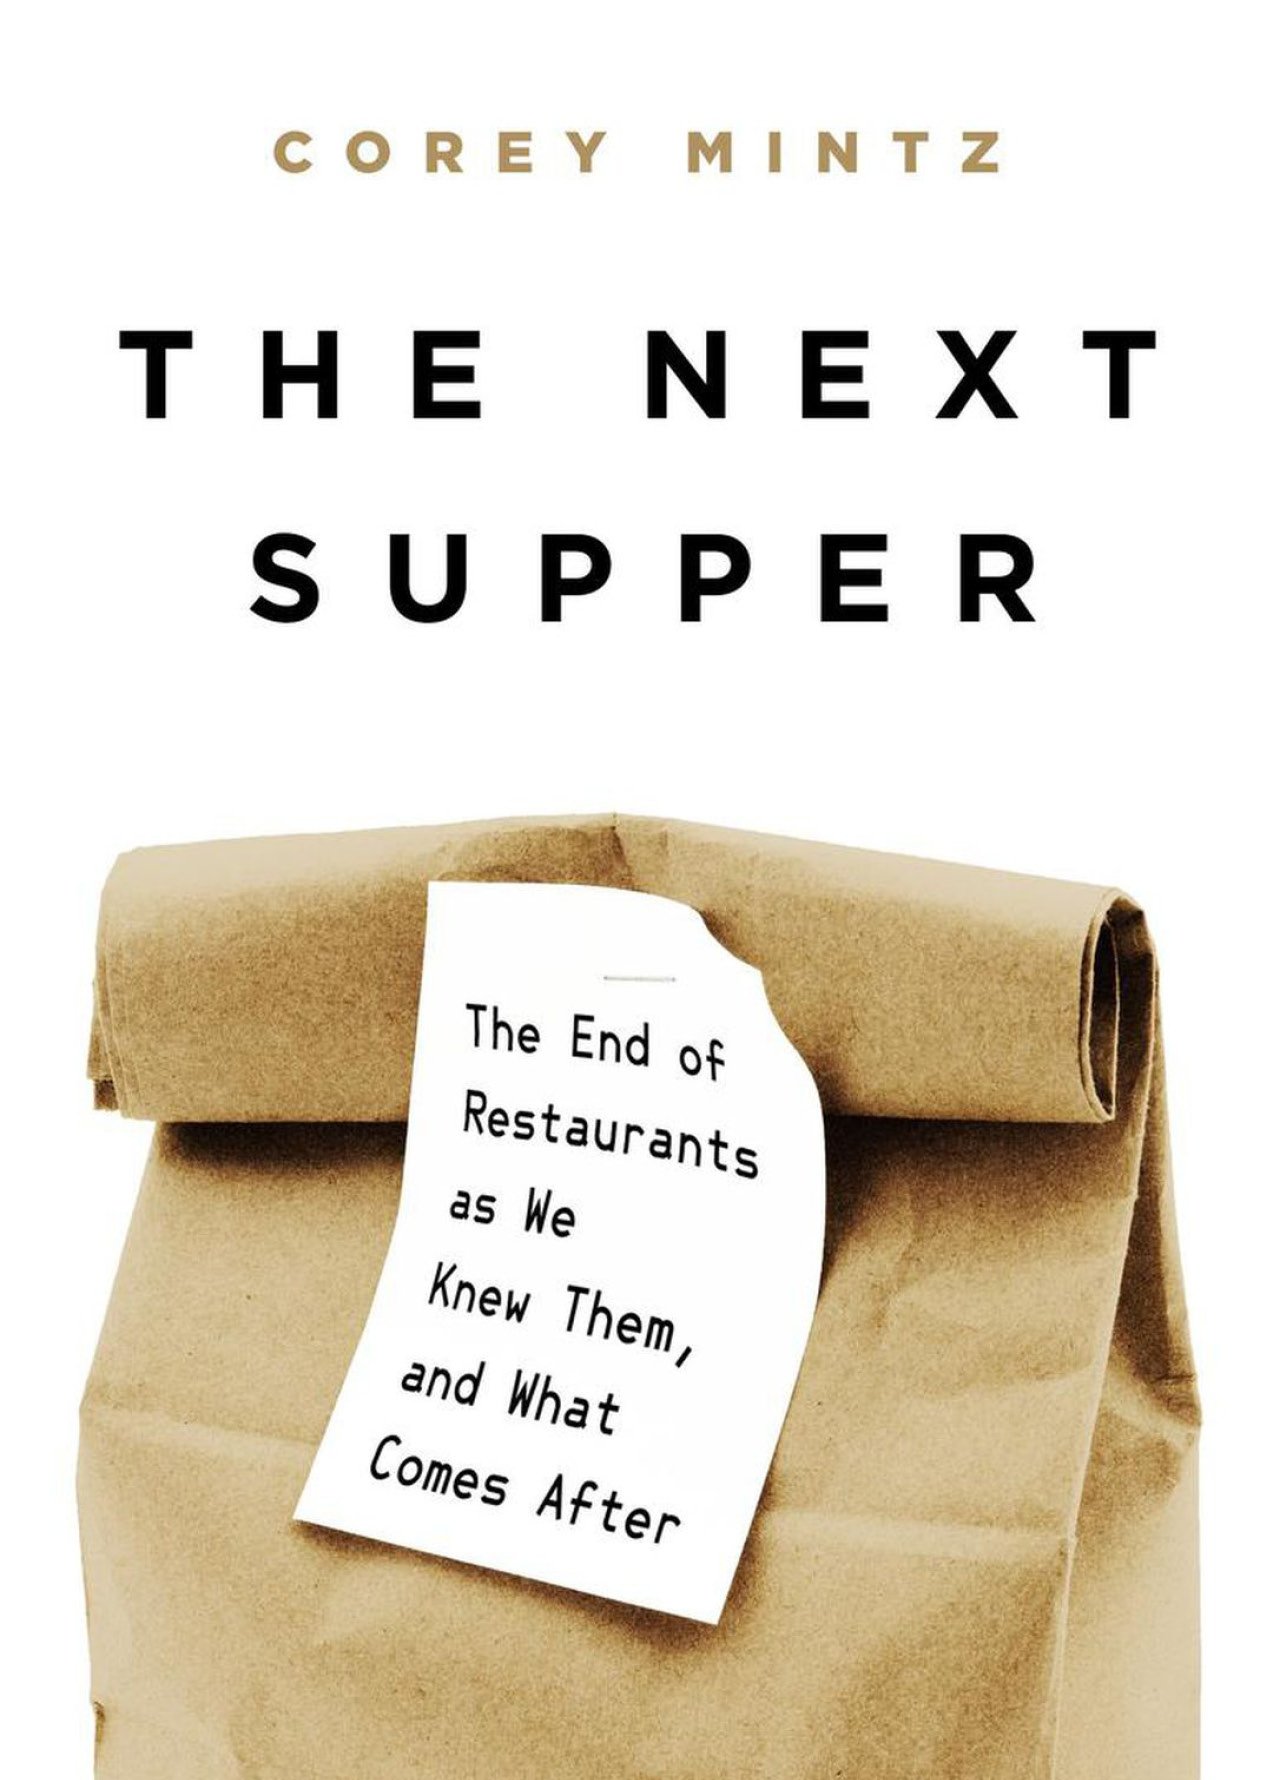 The cover of the book the Next Supper